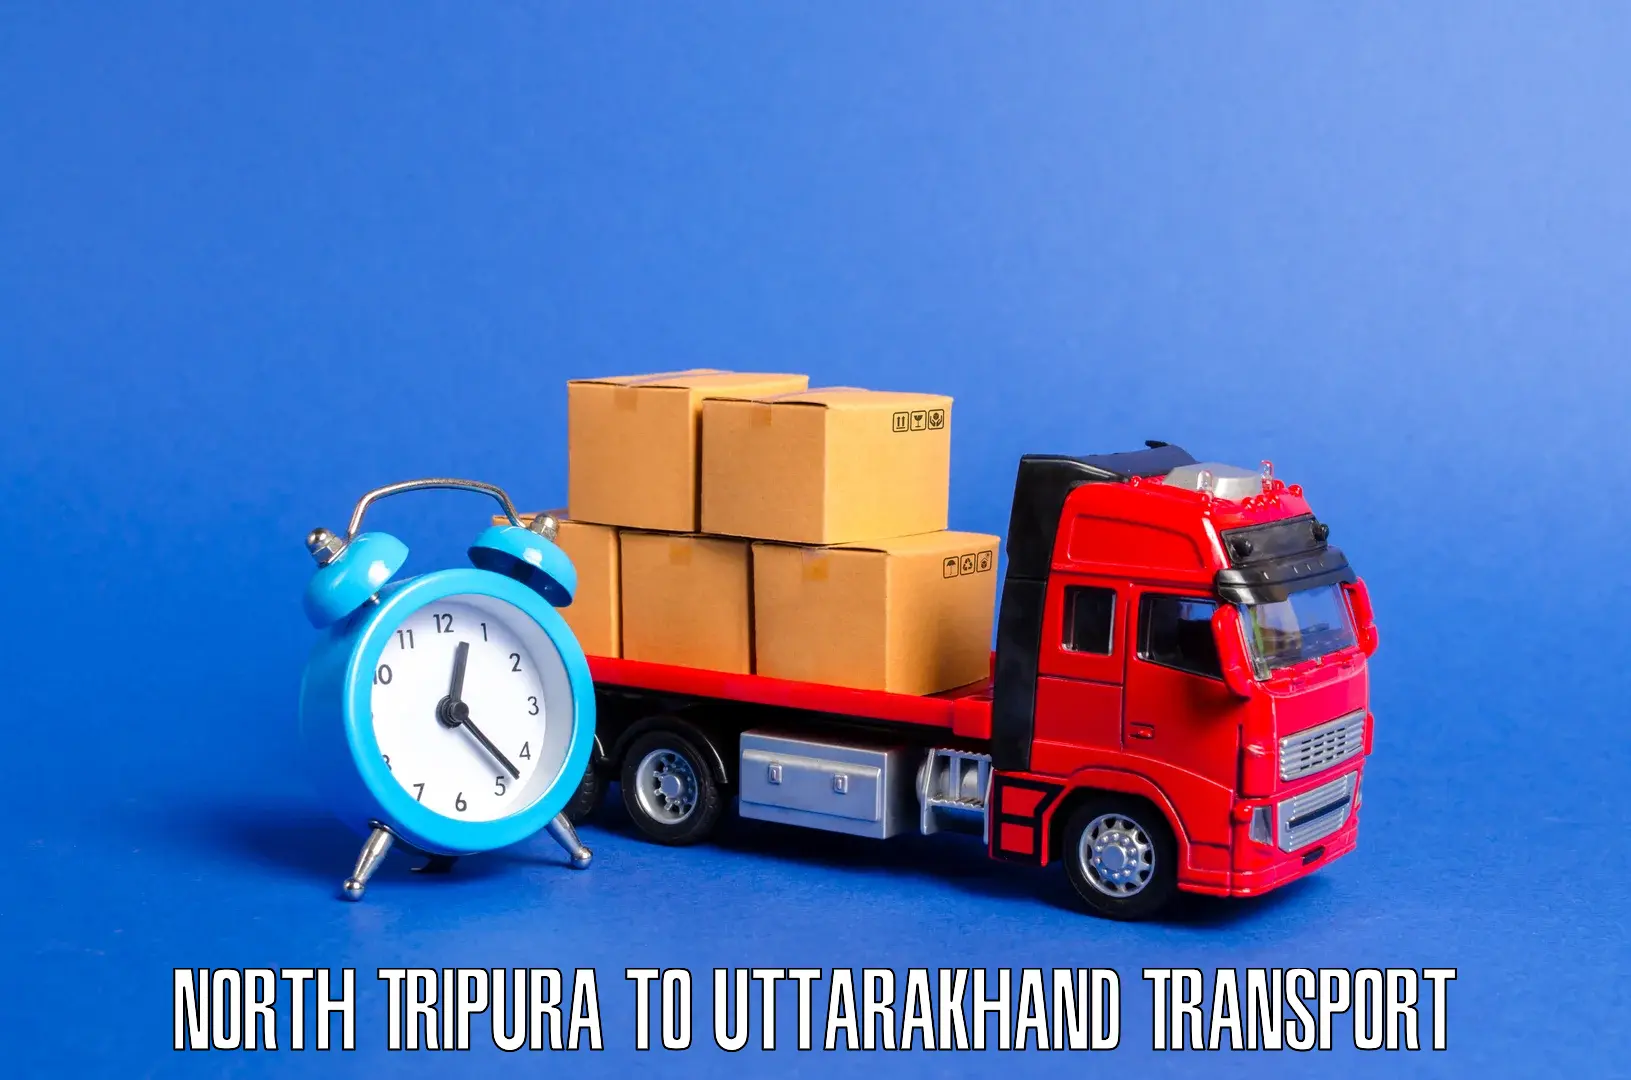 Air freight transport services North Tripura to Tanakpur